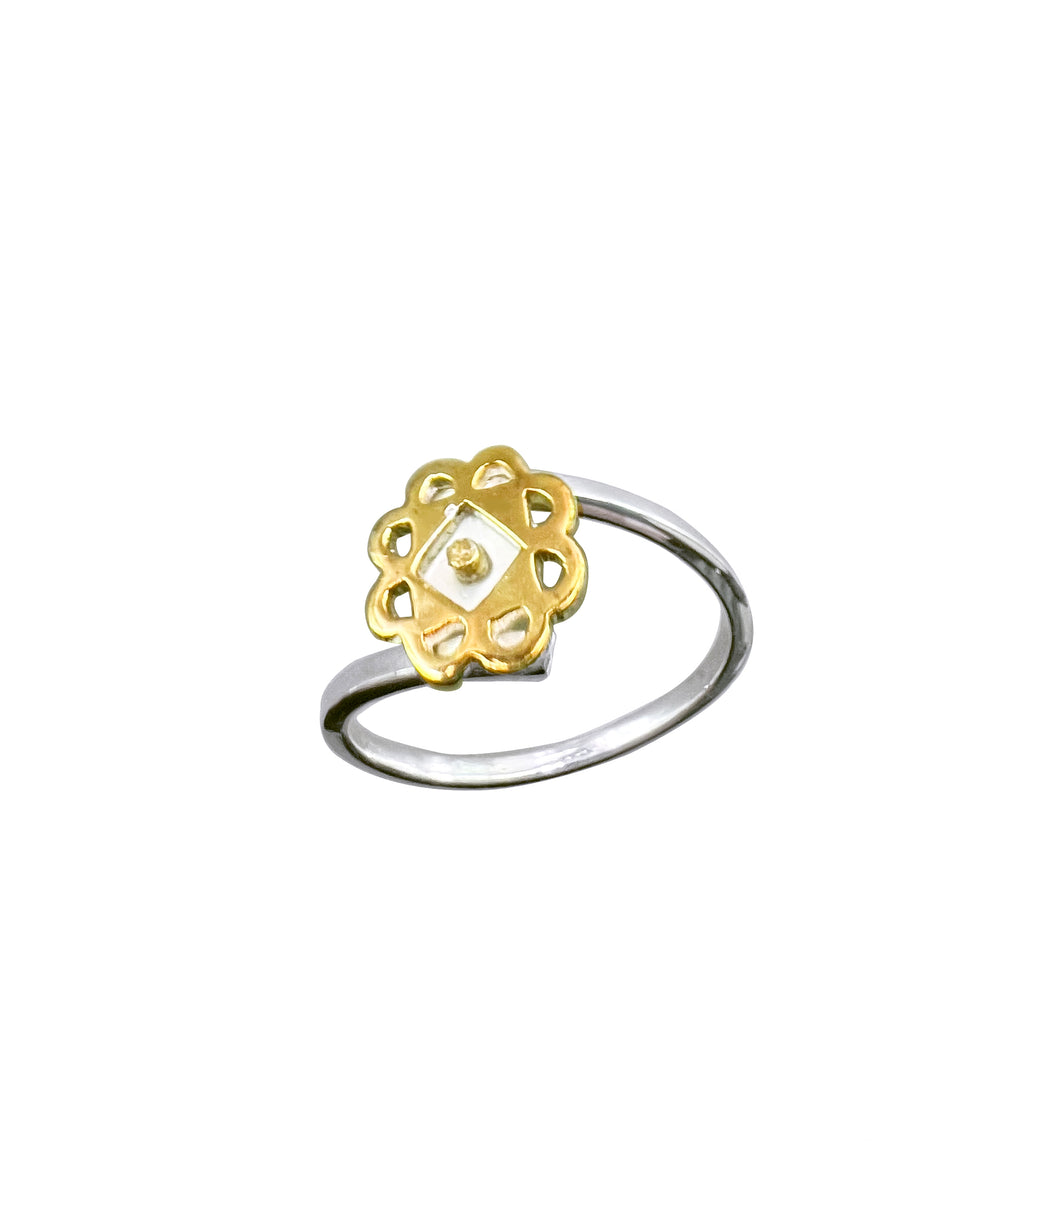 Silver and yellow gold plated embelished with mother of pearl flower ring